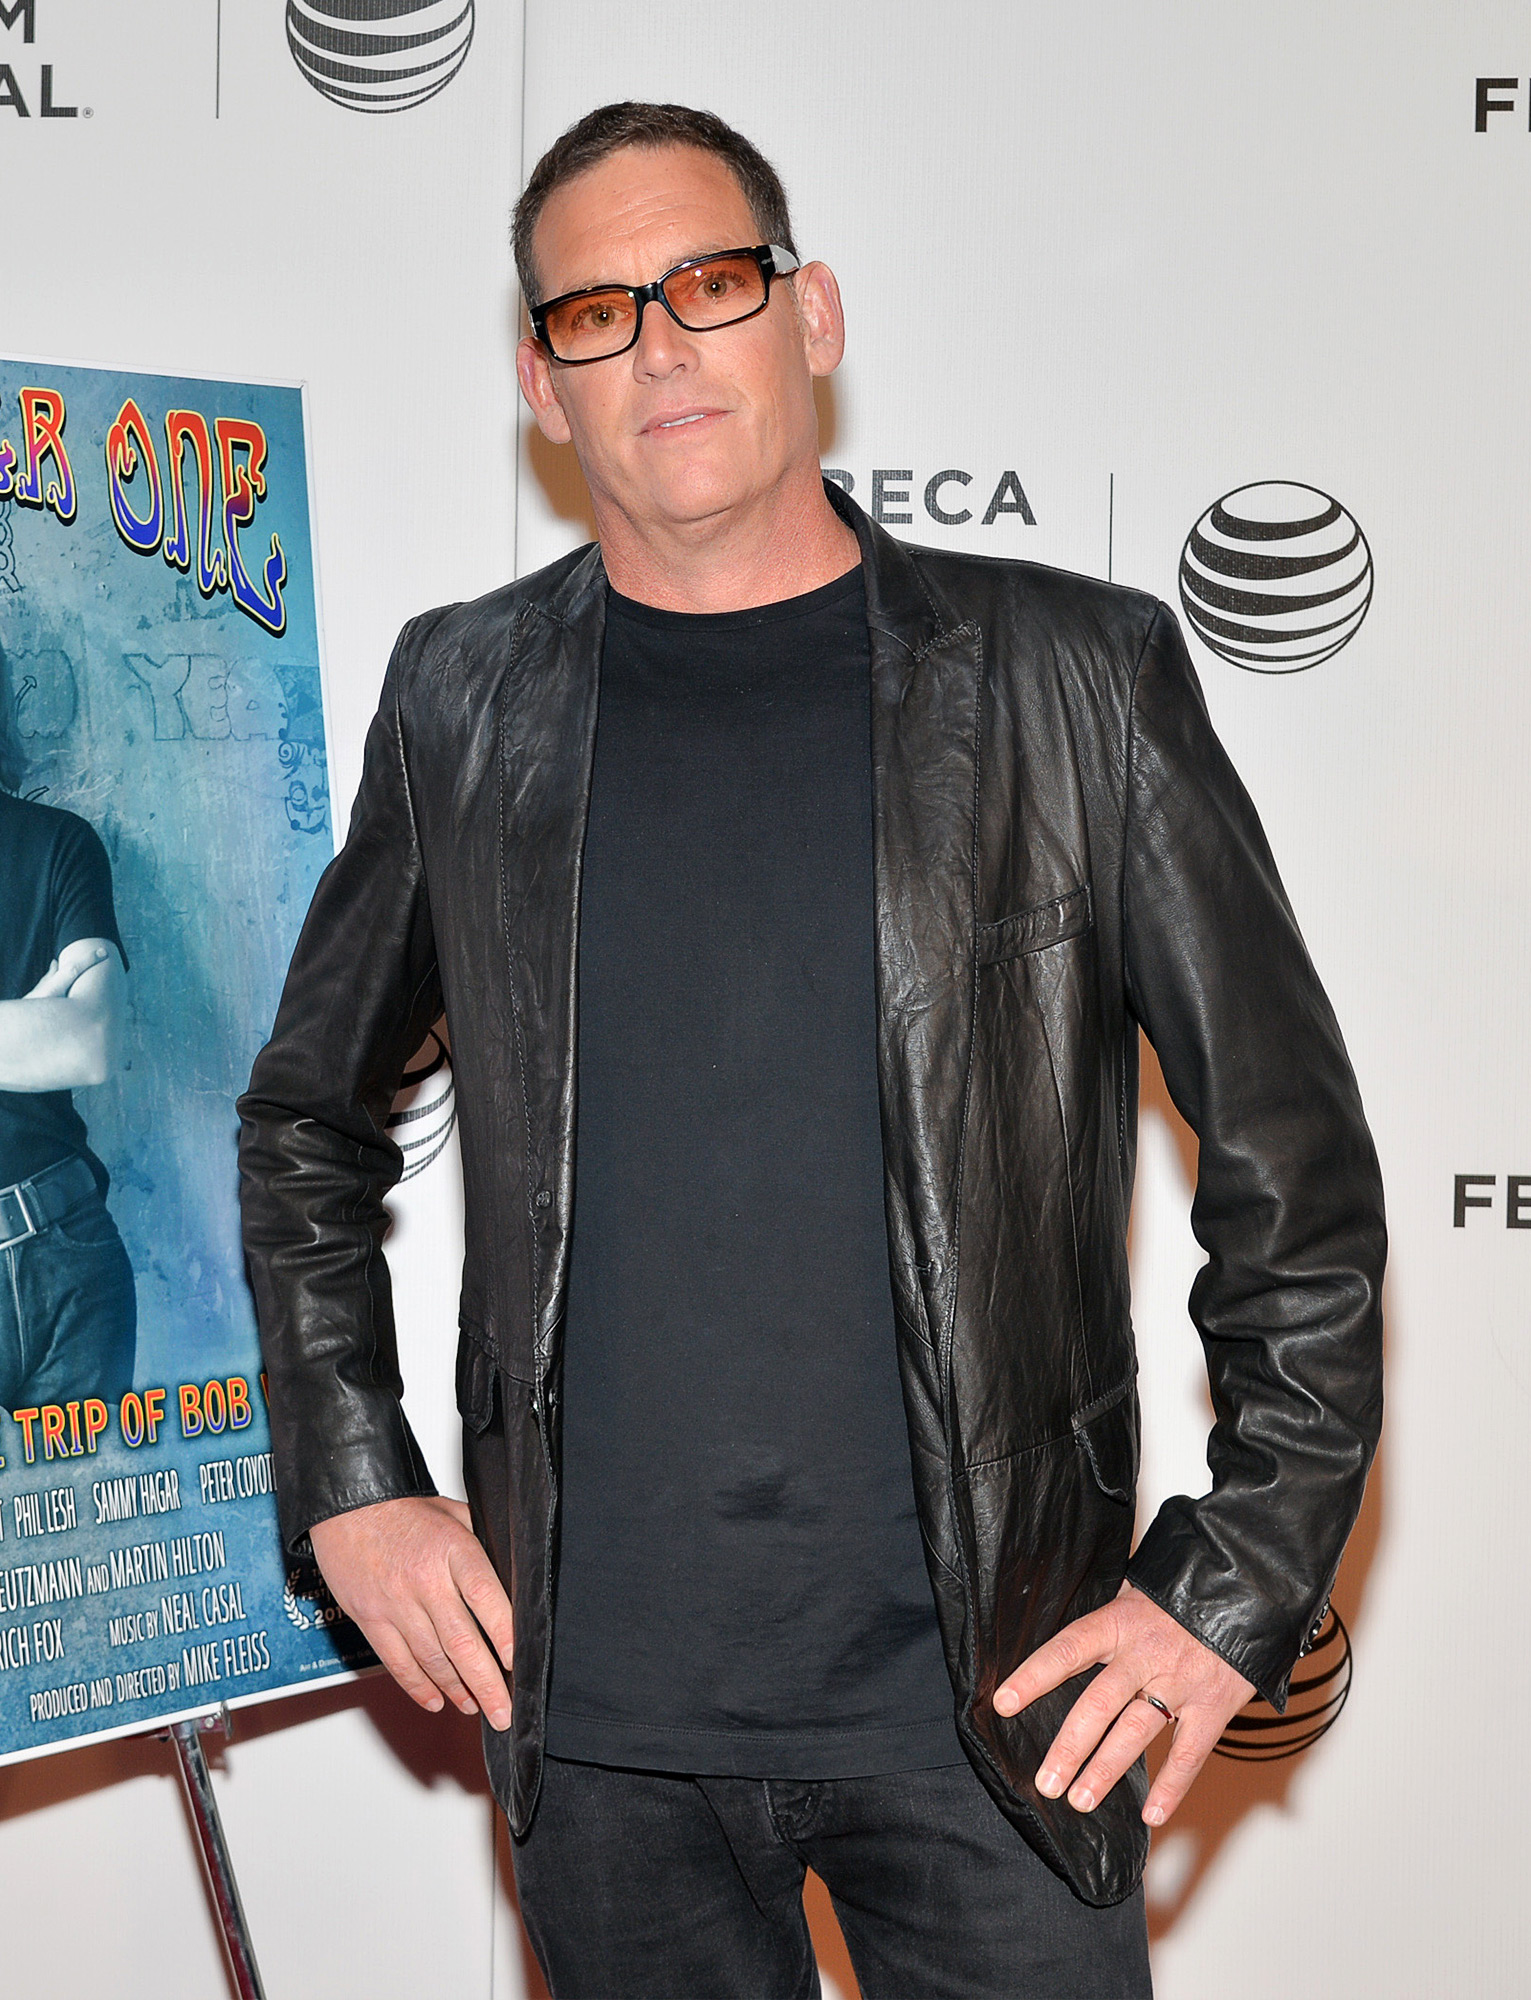 'Bachelor' Creator Mike Fleiss Speaks Out After Racial Discrimination Claims